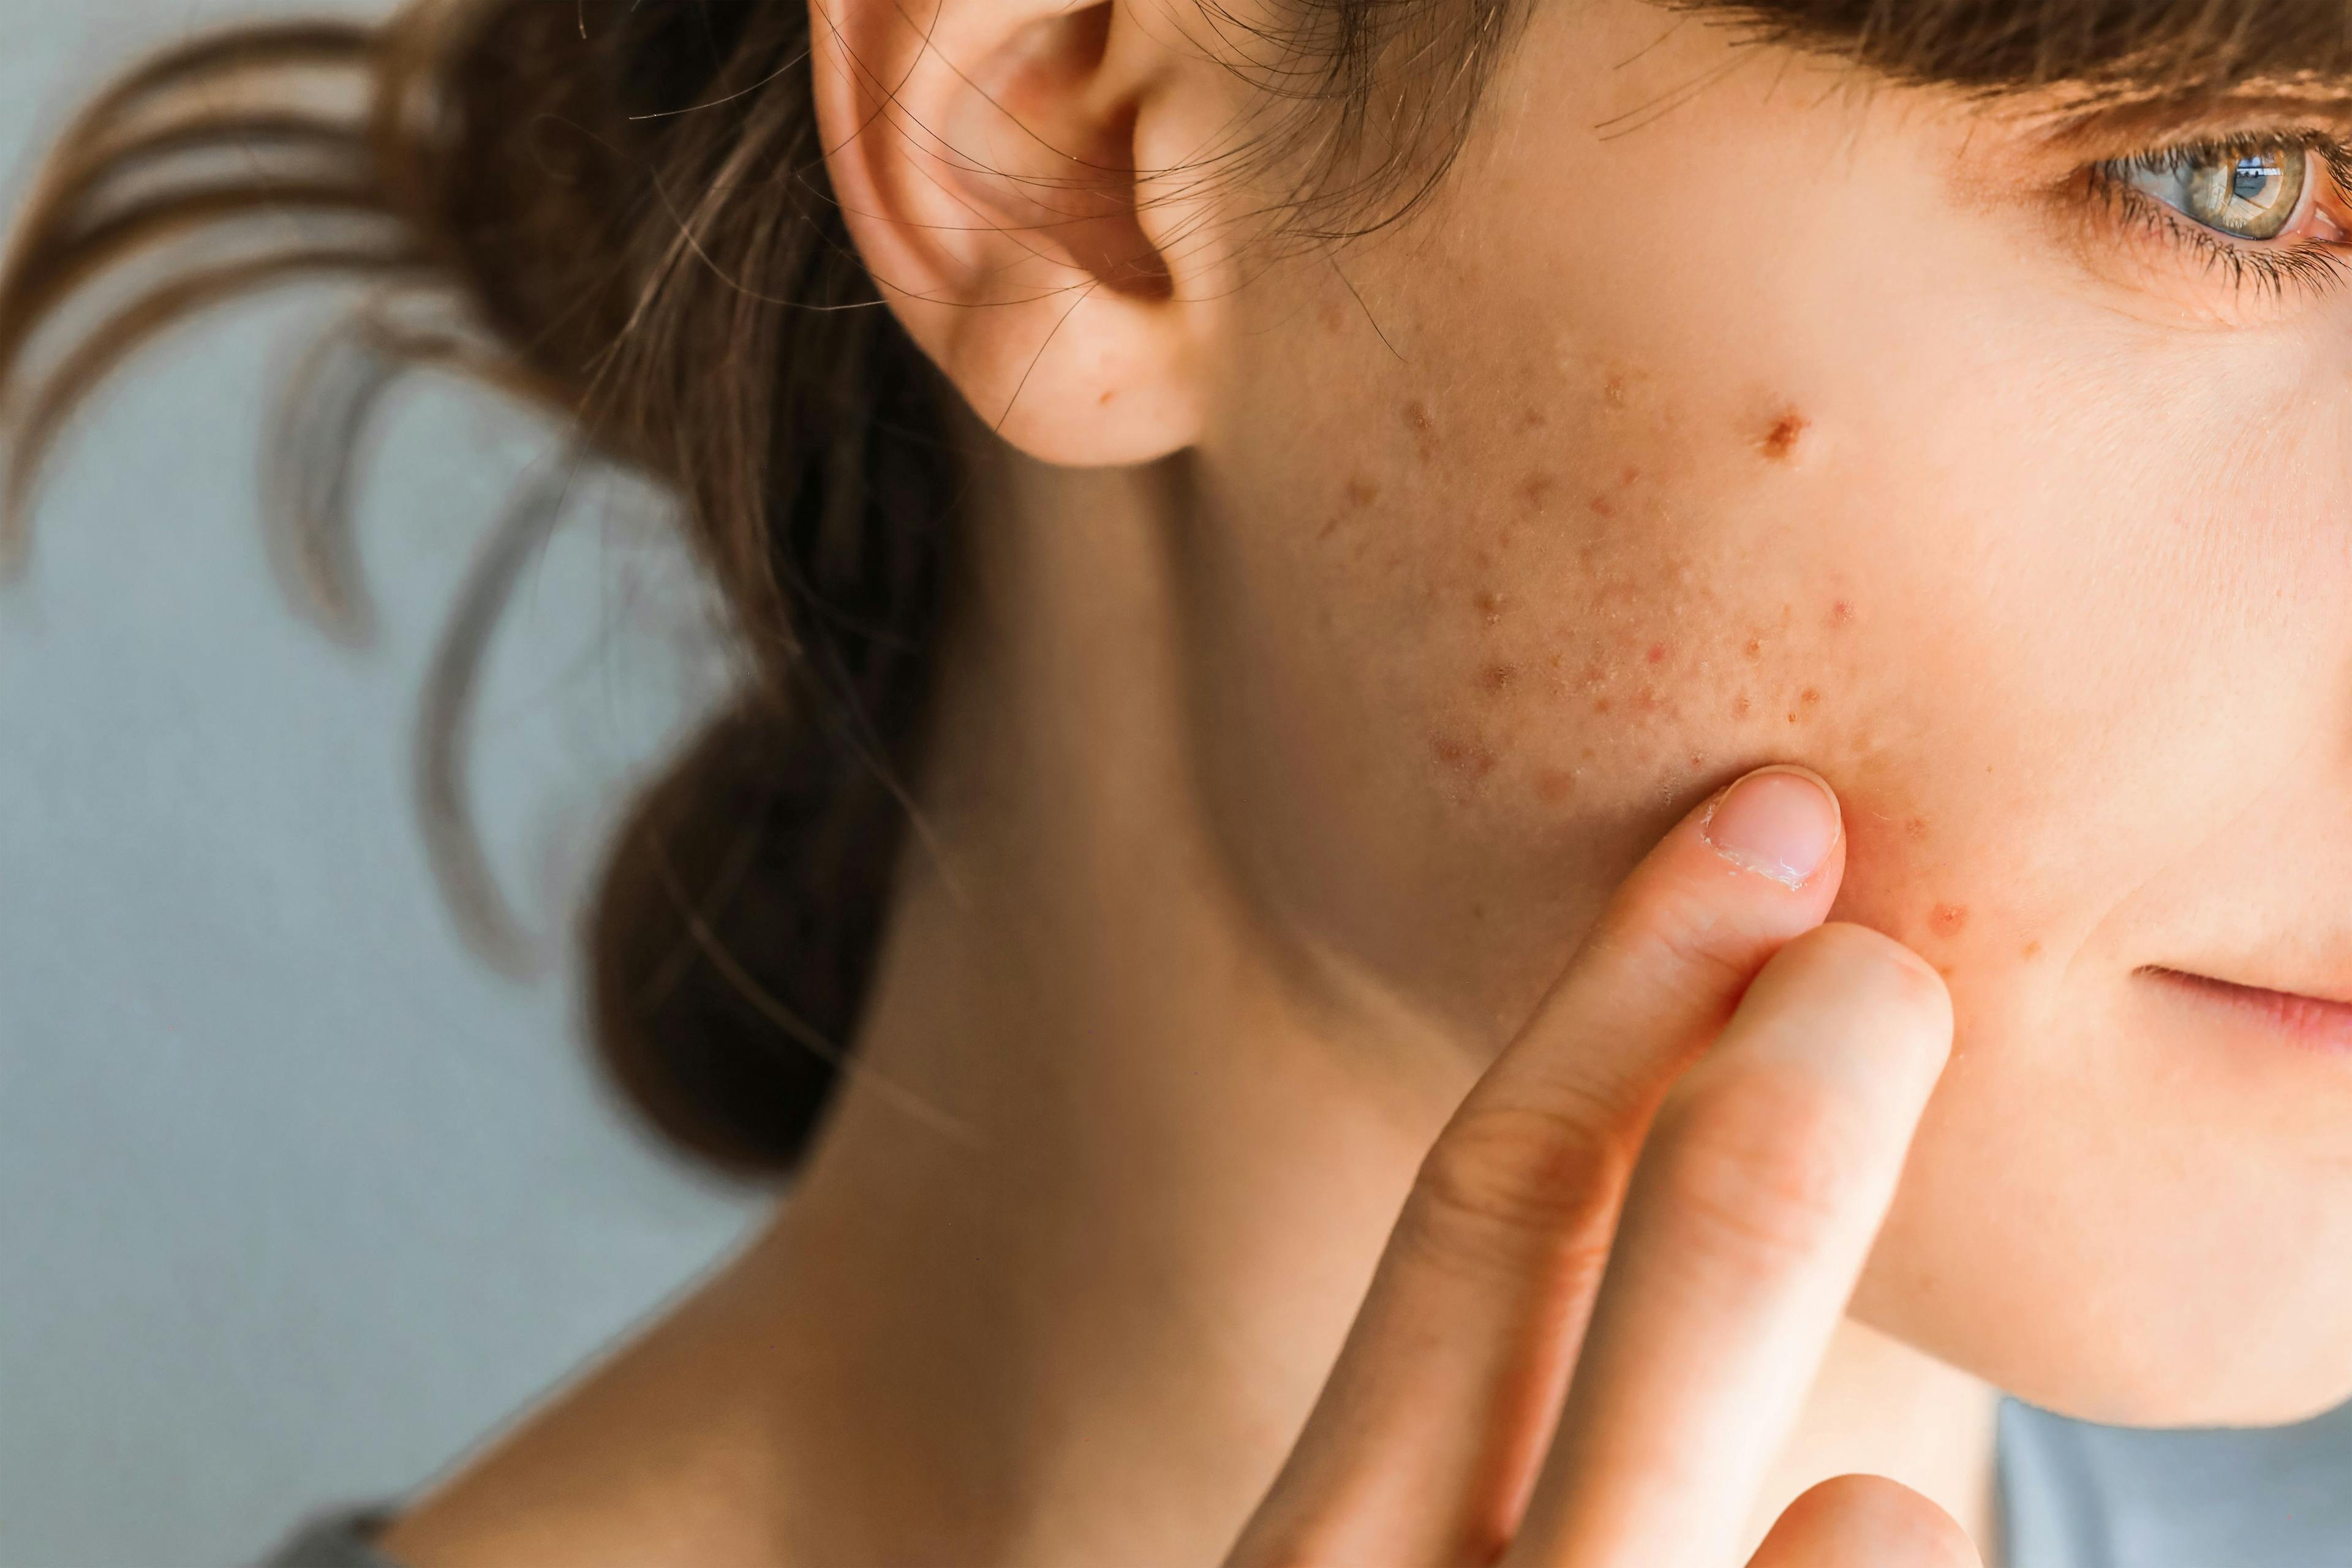 Preadolescent Acne Linked to Higher Body Mass Index 